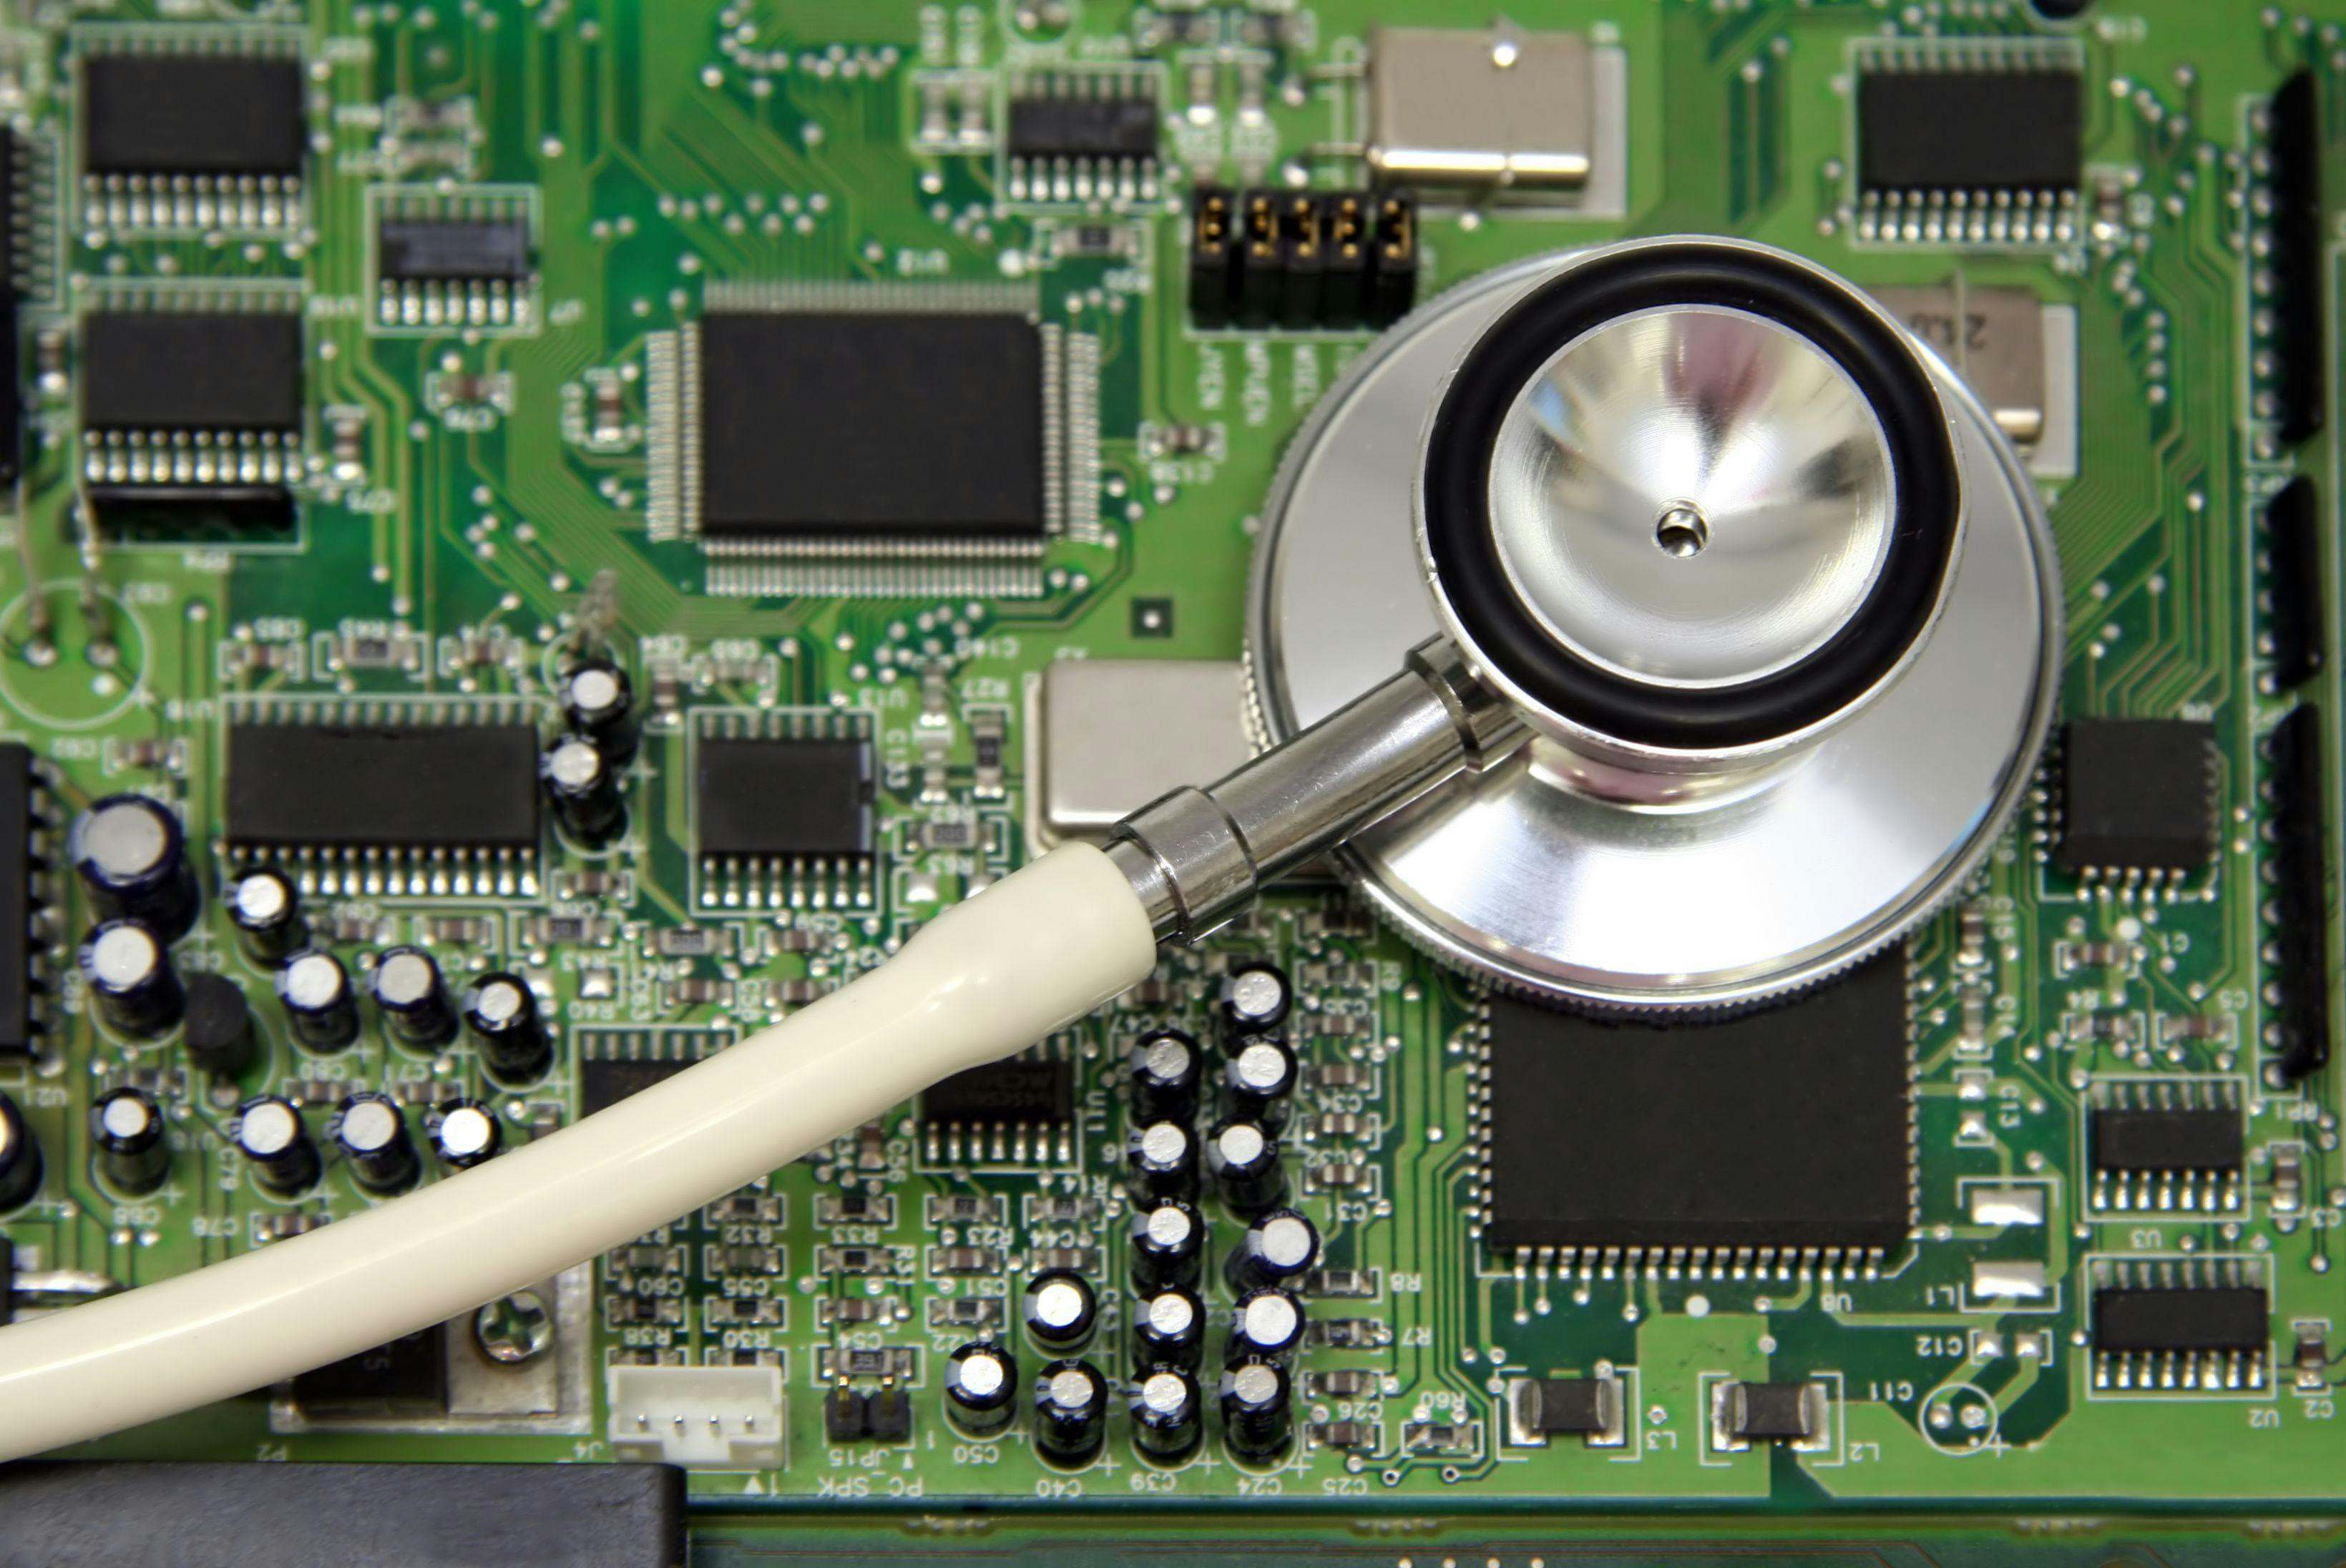 Survey shows alarming gaps in medical device cybersecurity